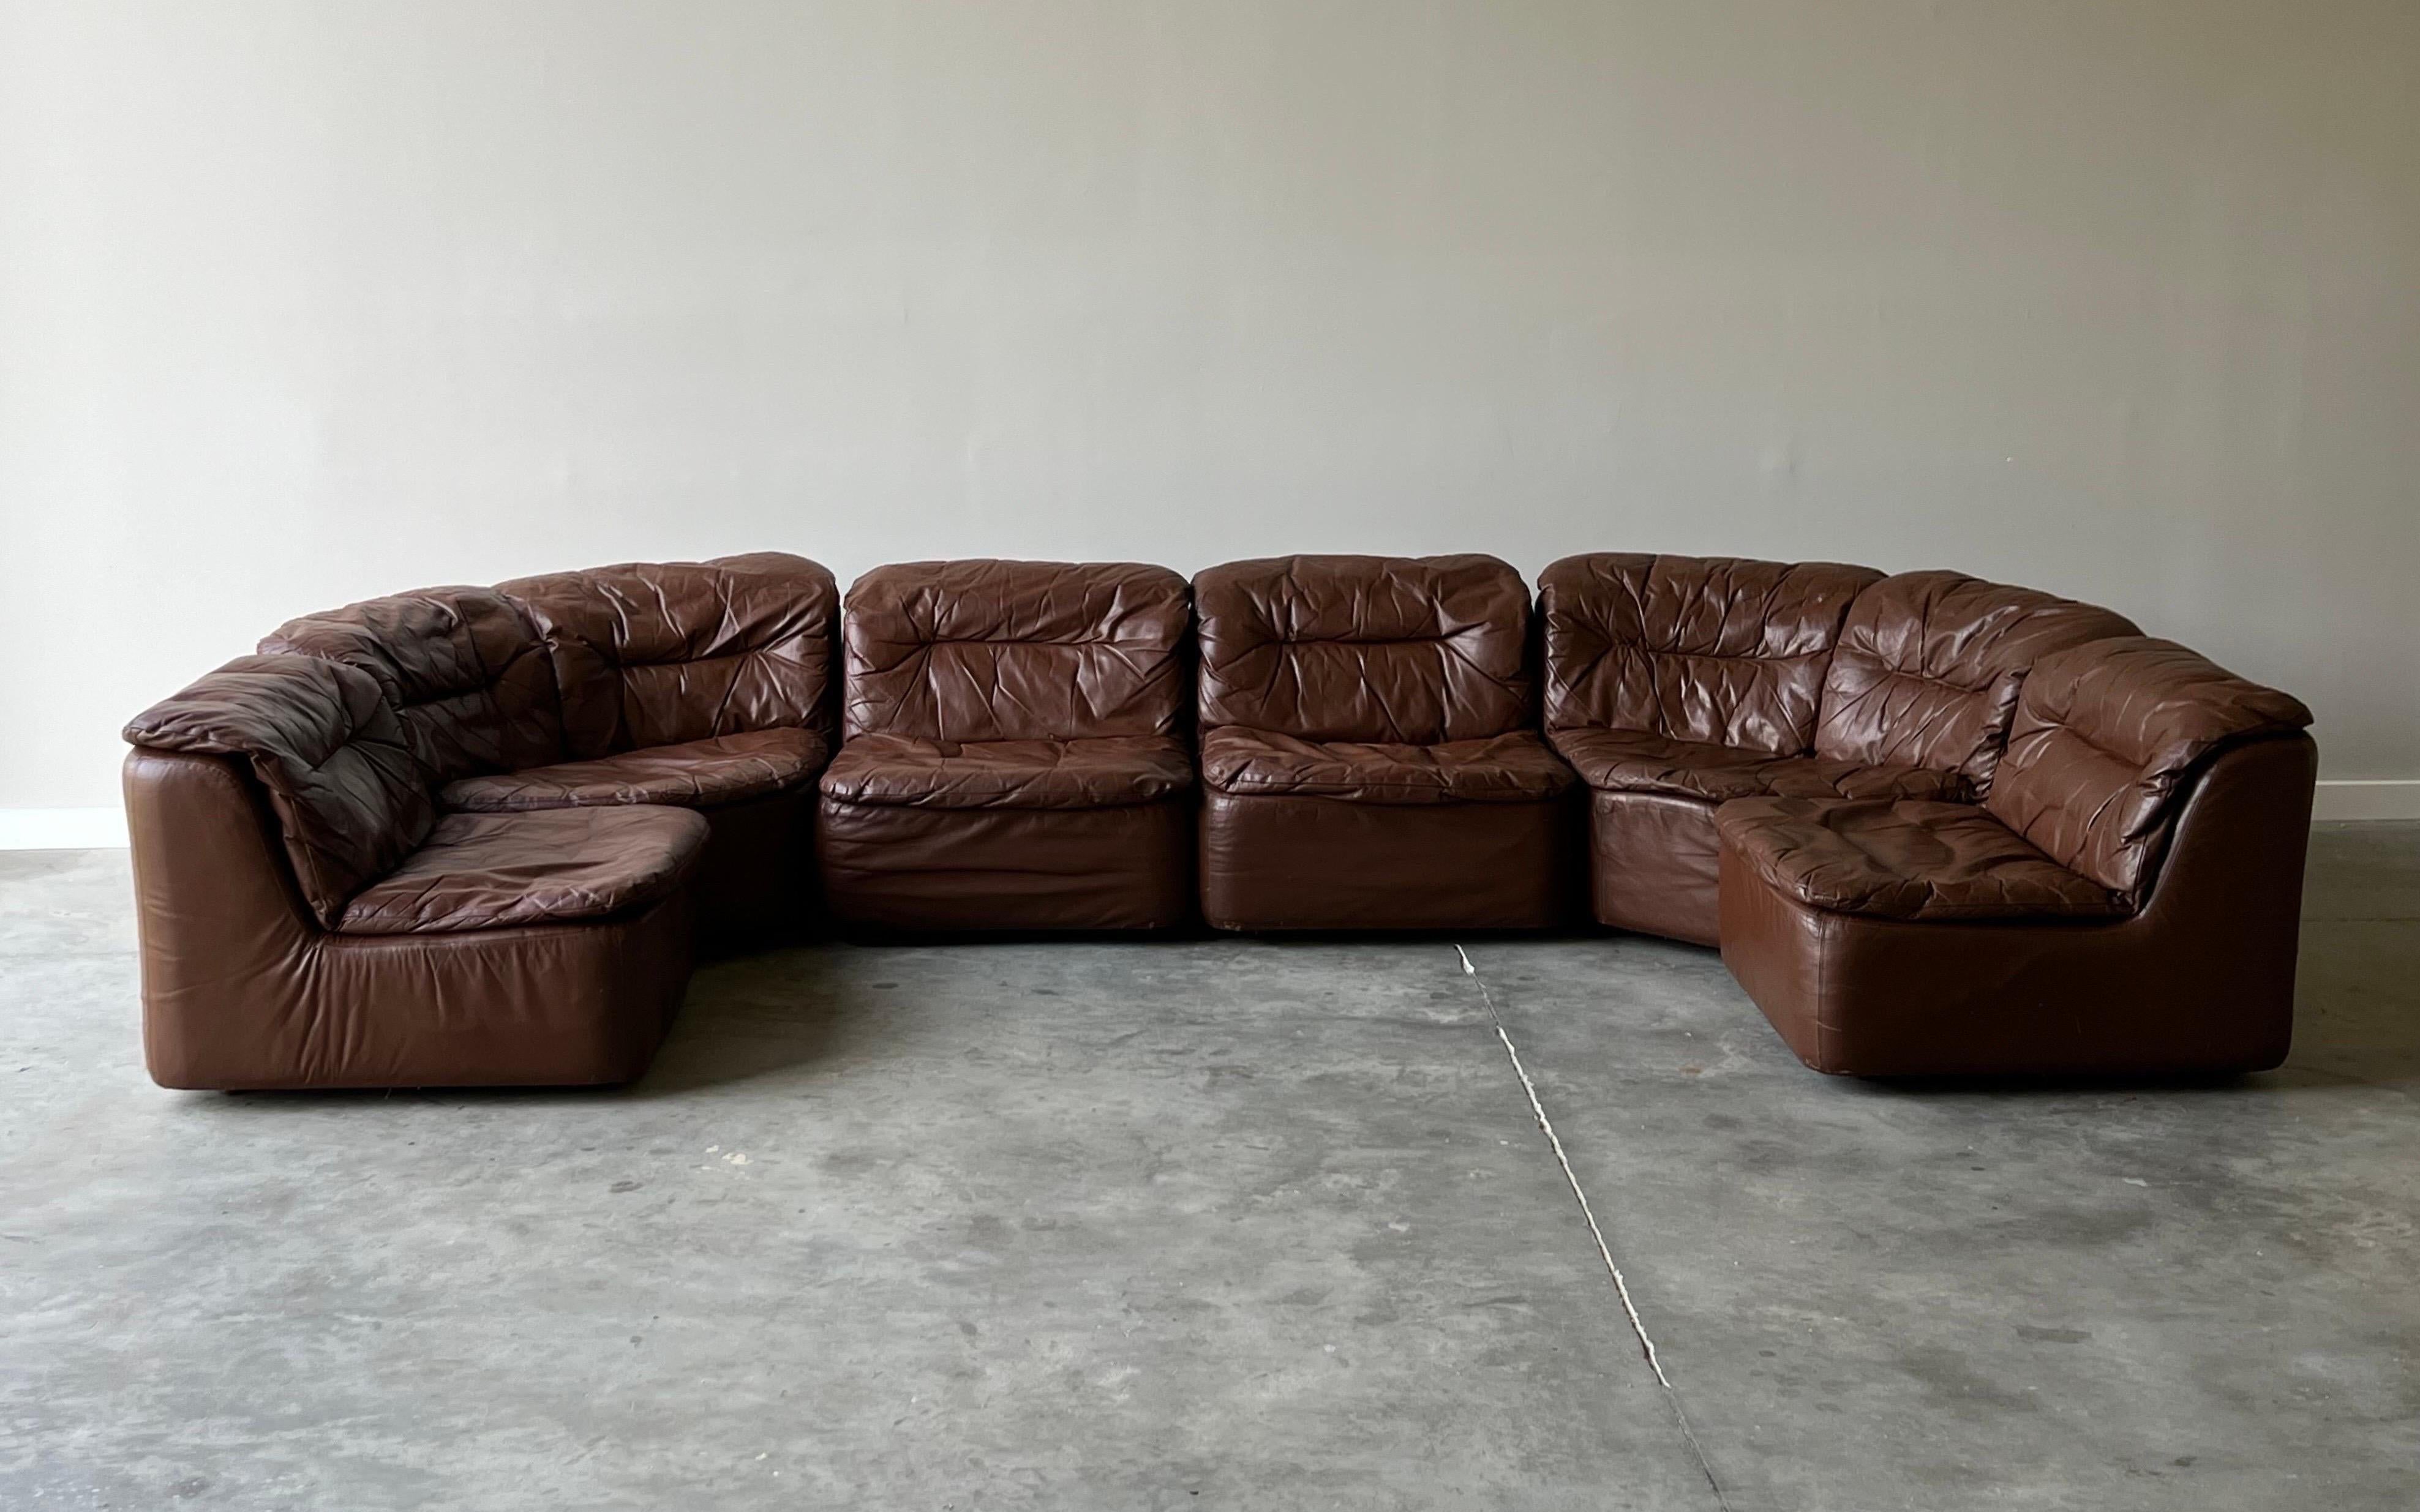 Original leather six piece modular sofa. This Plus 144 model sofa was designed by Friedrich Hill for the Walter Knoll Collection and produced by Brayton International, circa 1970s. This sofa has original leather and all original tags are present.